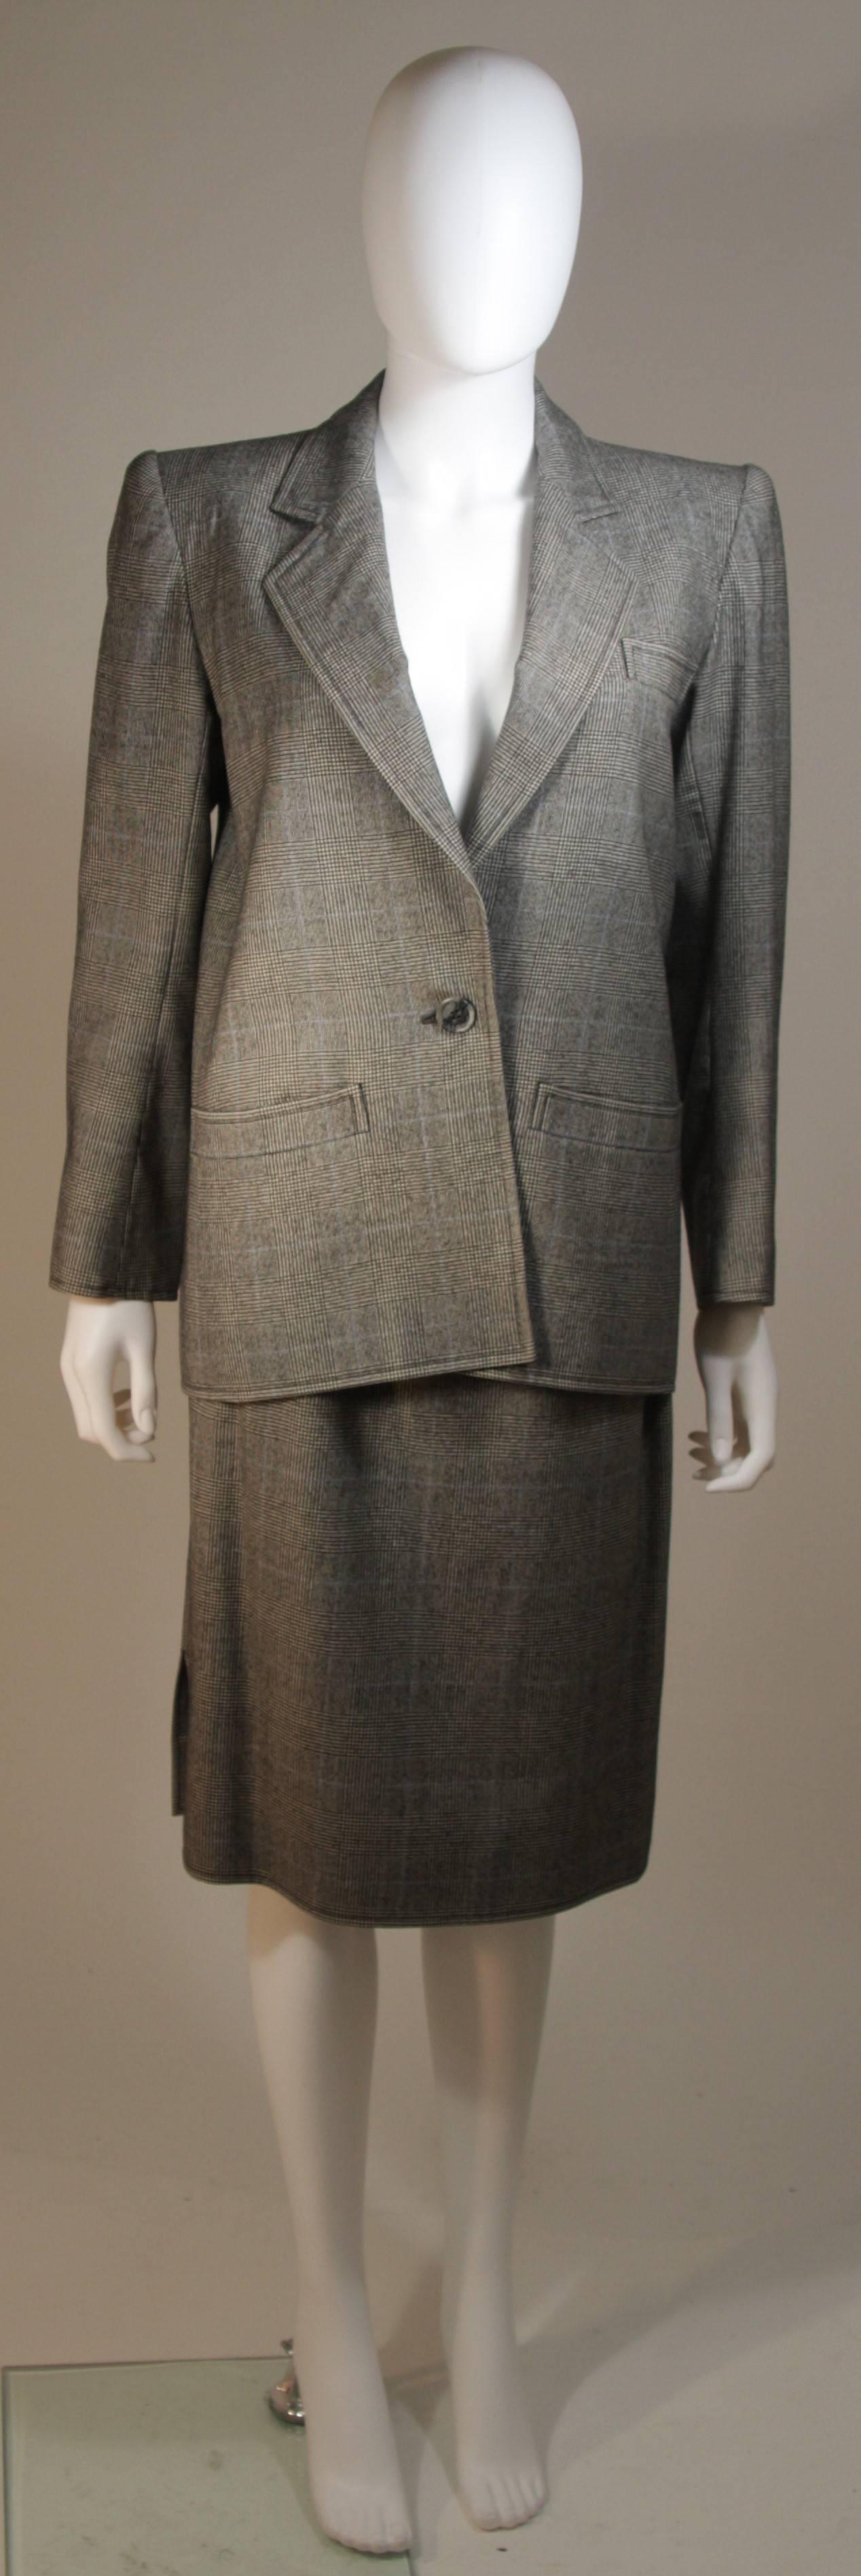 This Yves Saint Laurent skirt suit is composed of a grey plaid wool with blue accents. The jacket has center front button closures. The skirt has a zipper closure. 

There is a small moth hole, center back. Sold 'As Is'

**Please cross-reference